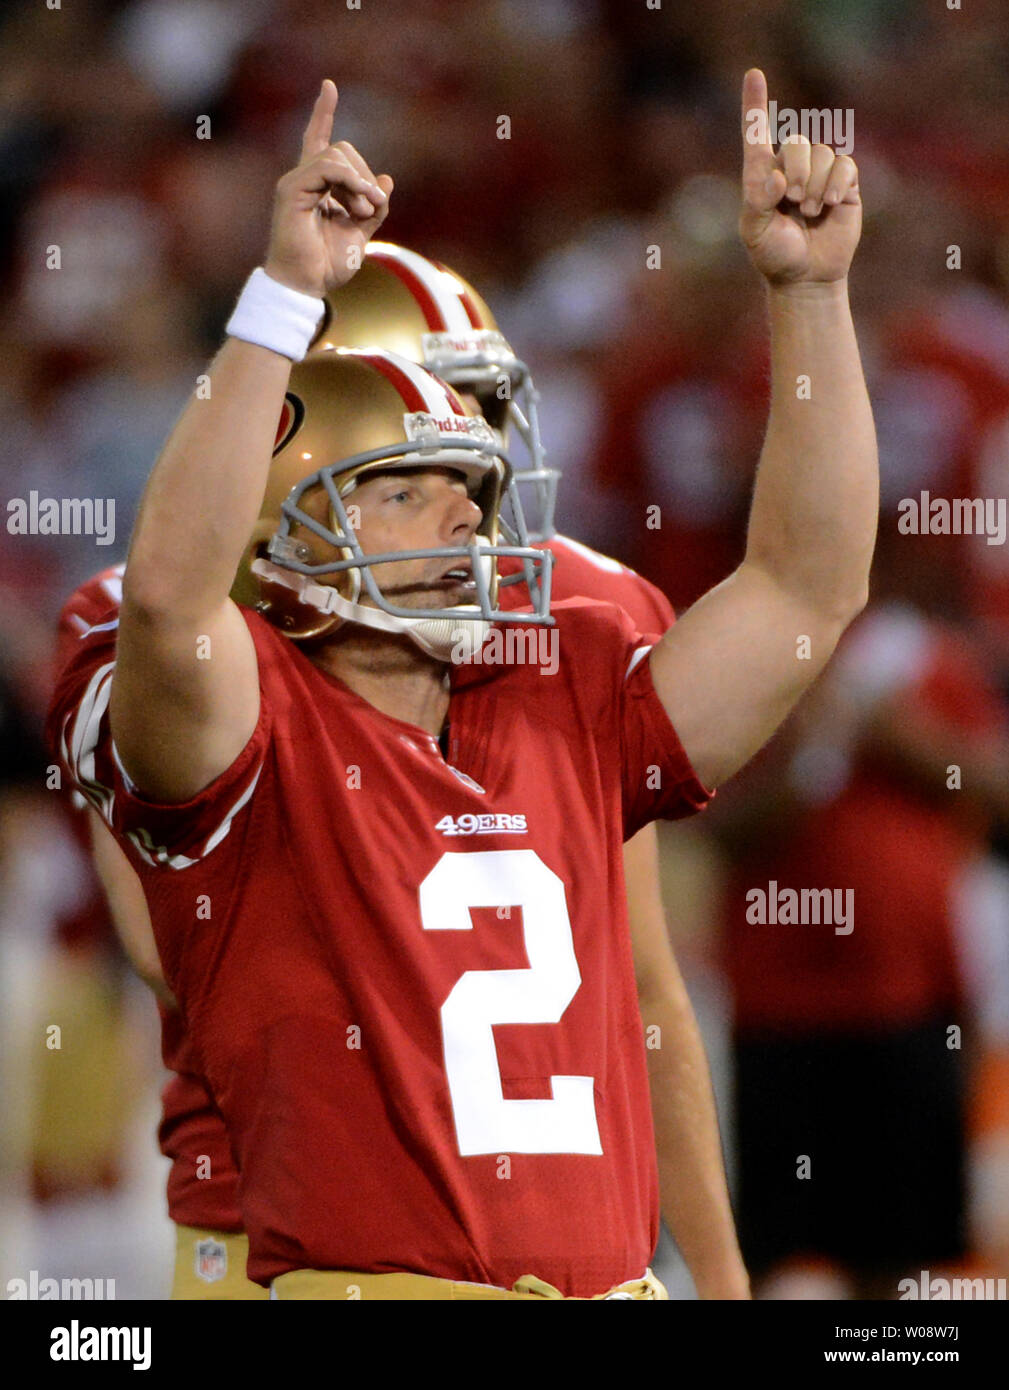 San Francisco 49ers kicker David Akers (L) celebrates a 28 yard field goal from the hold of Andy Lee in the fourth quarter against the Seattle Seahawks at Candlestick Park in San Francisco on October 18, 2012. The 49ers defeated the Seahawks 13-6.     UPI/Terry Schmitt Stock Photo